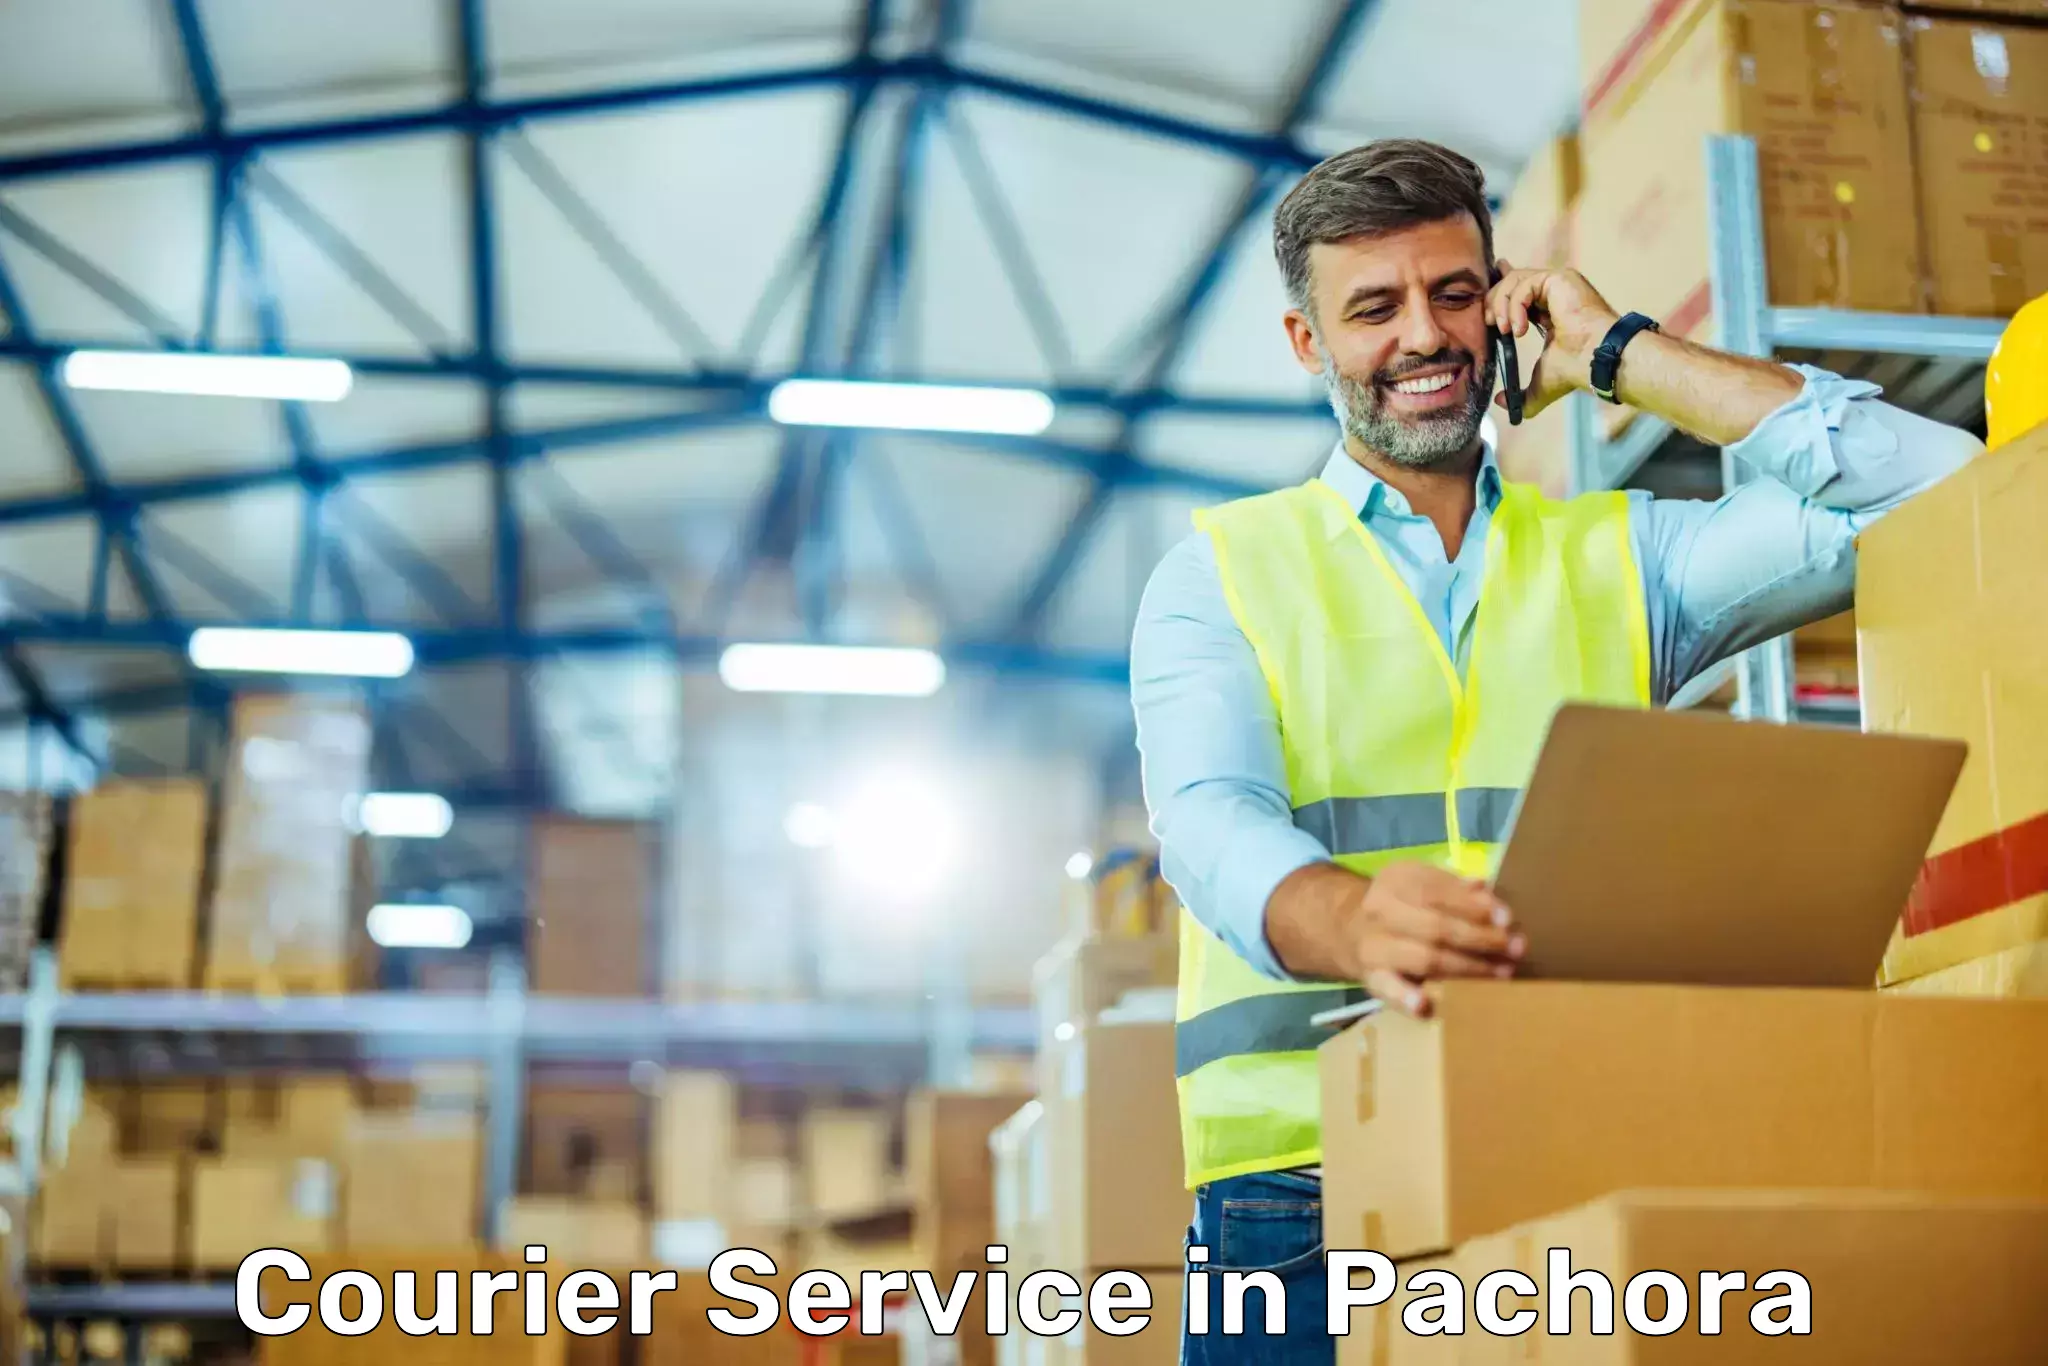 Speedy delivery service in Pachora